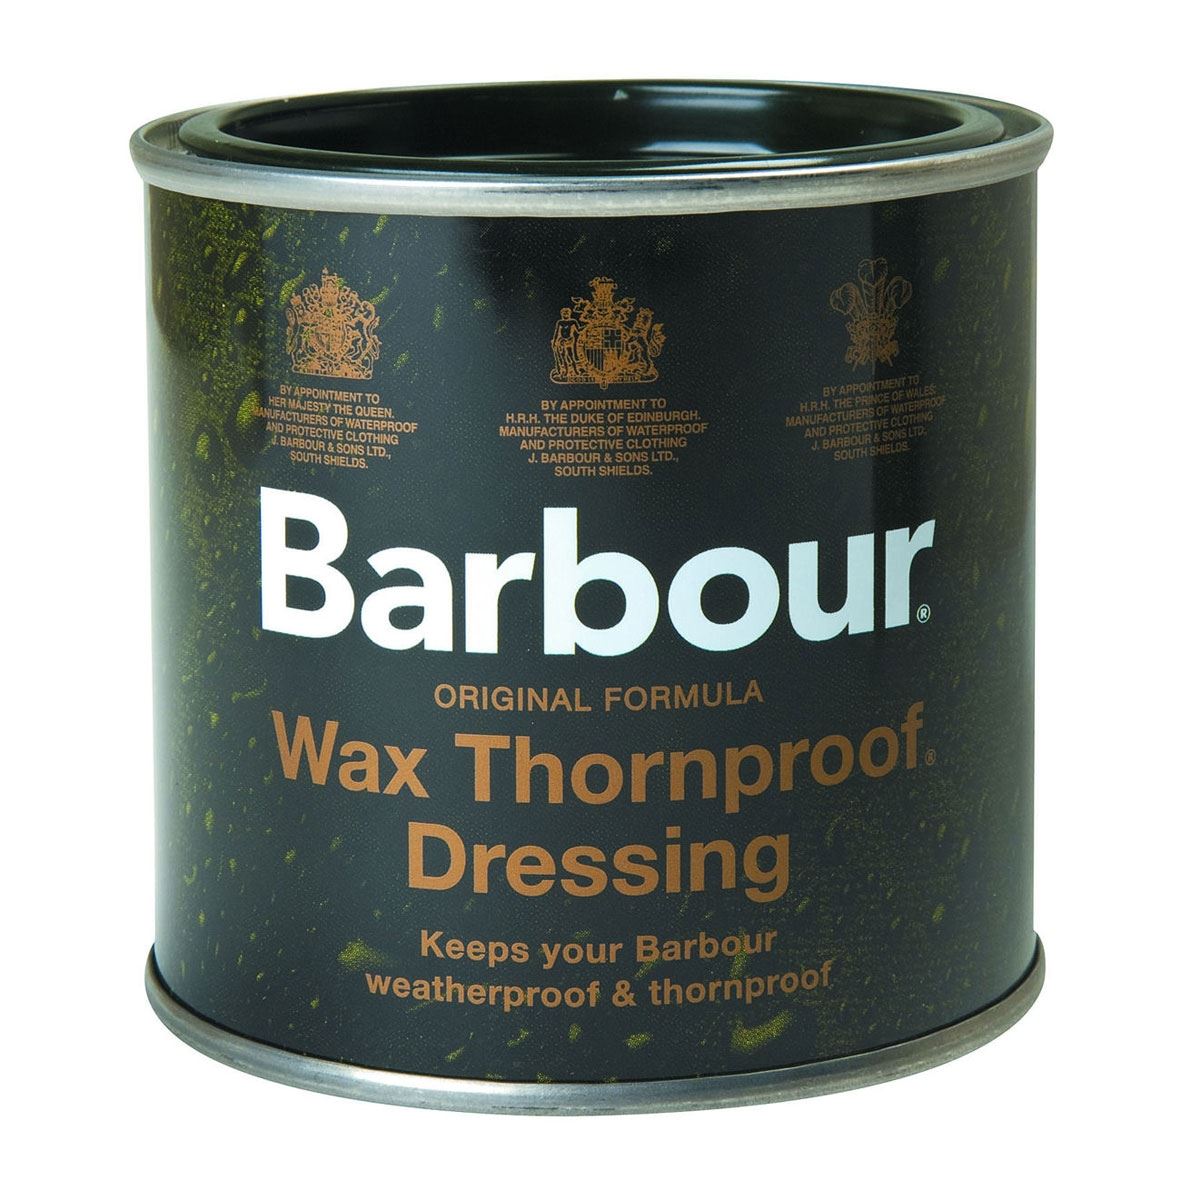 What is the application process for Barbour Wax Thornproof Dressing?